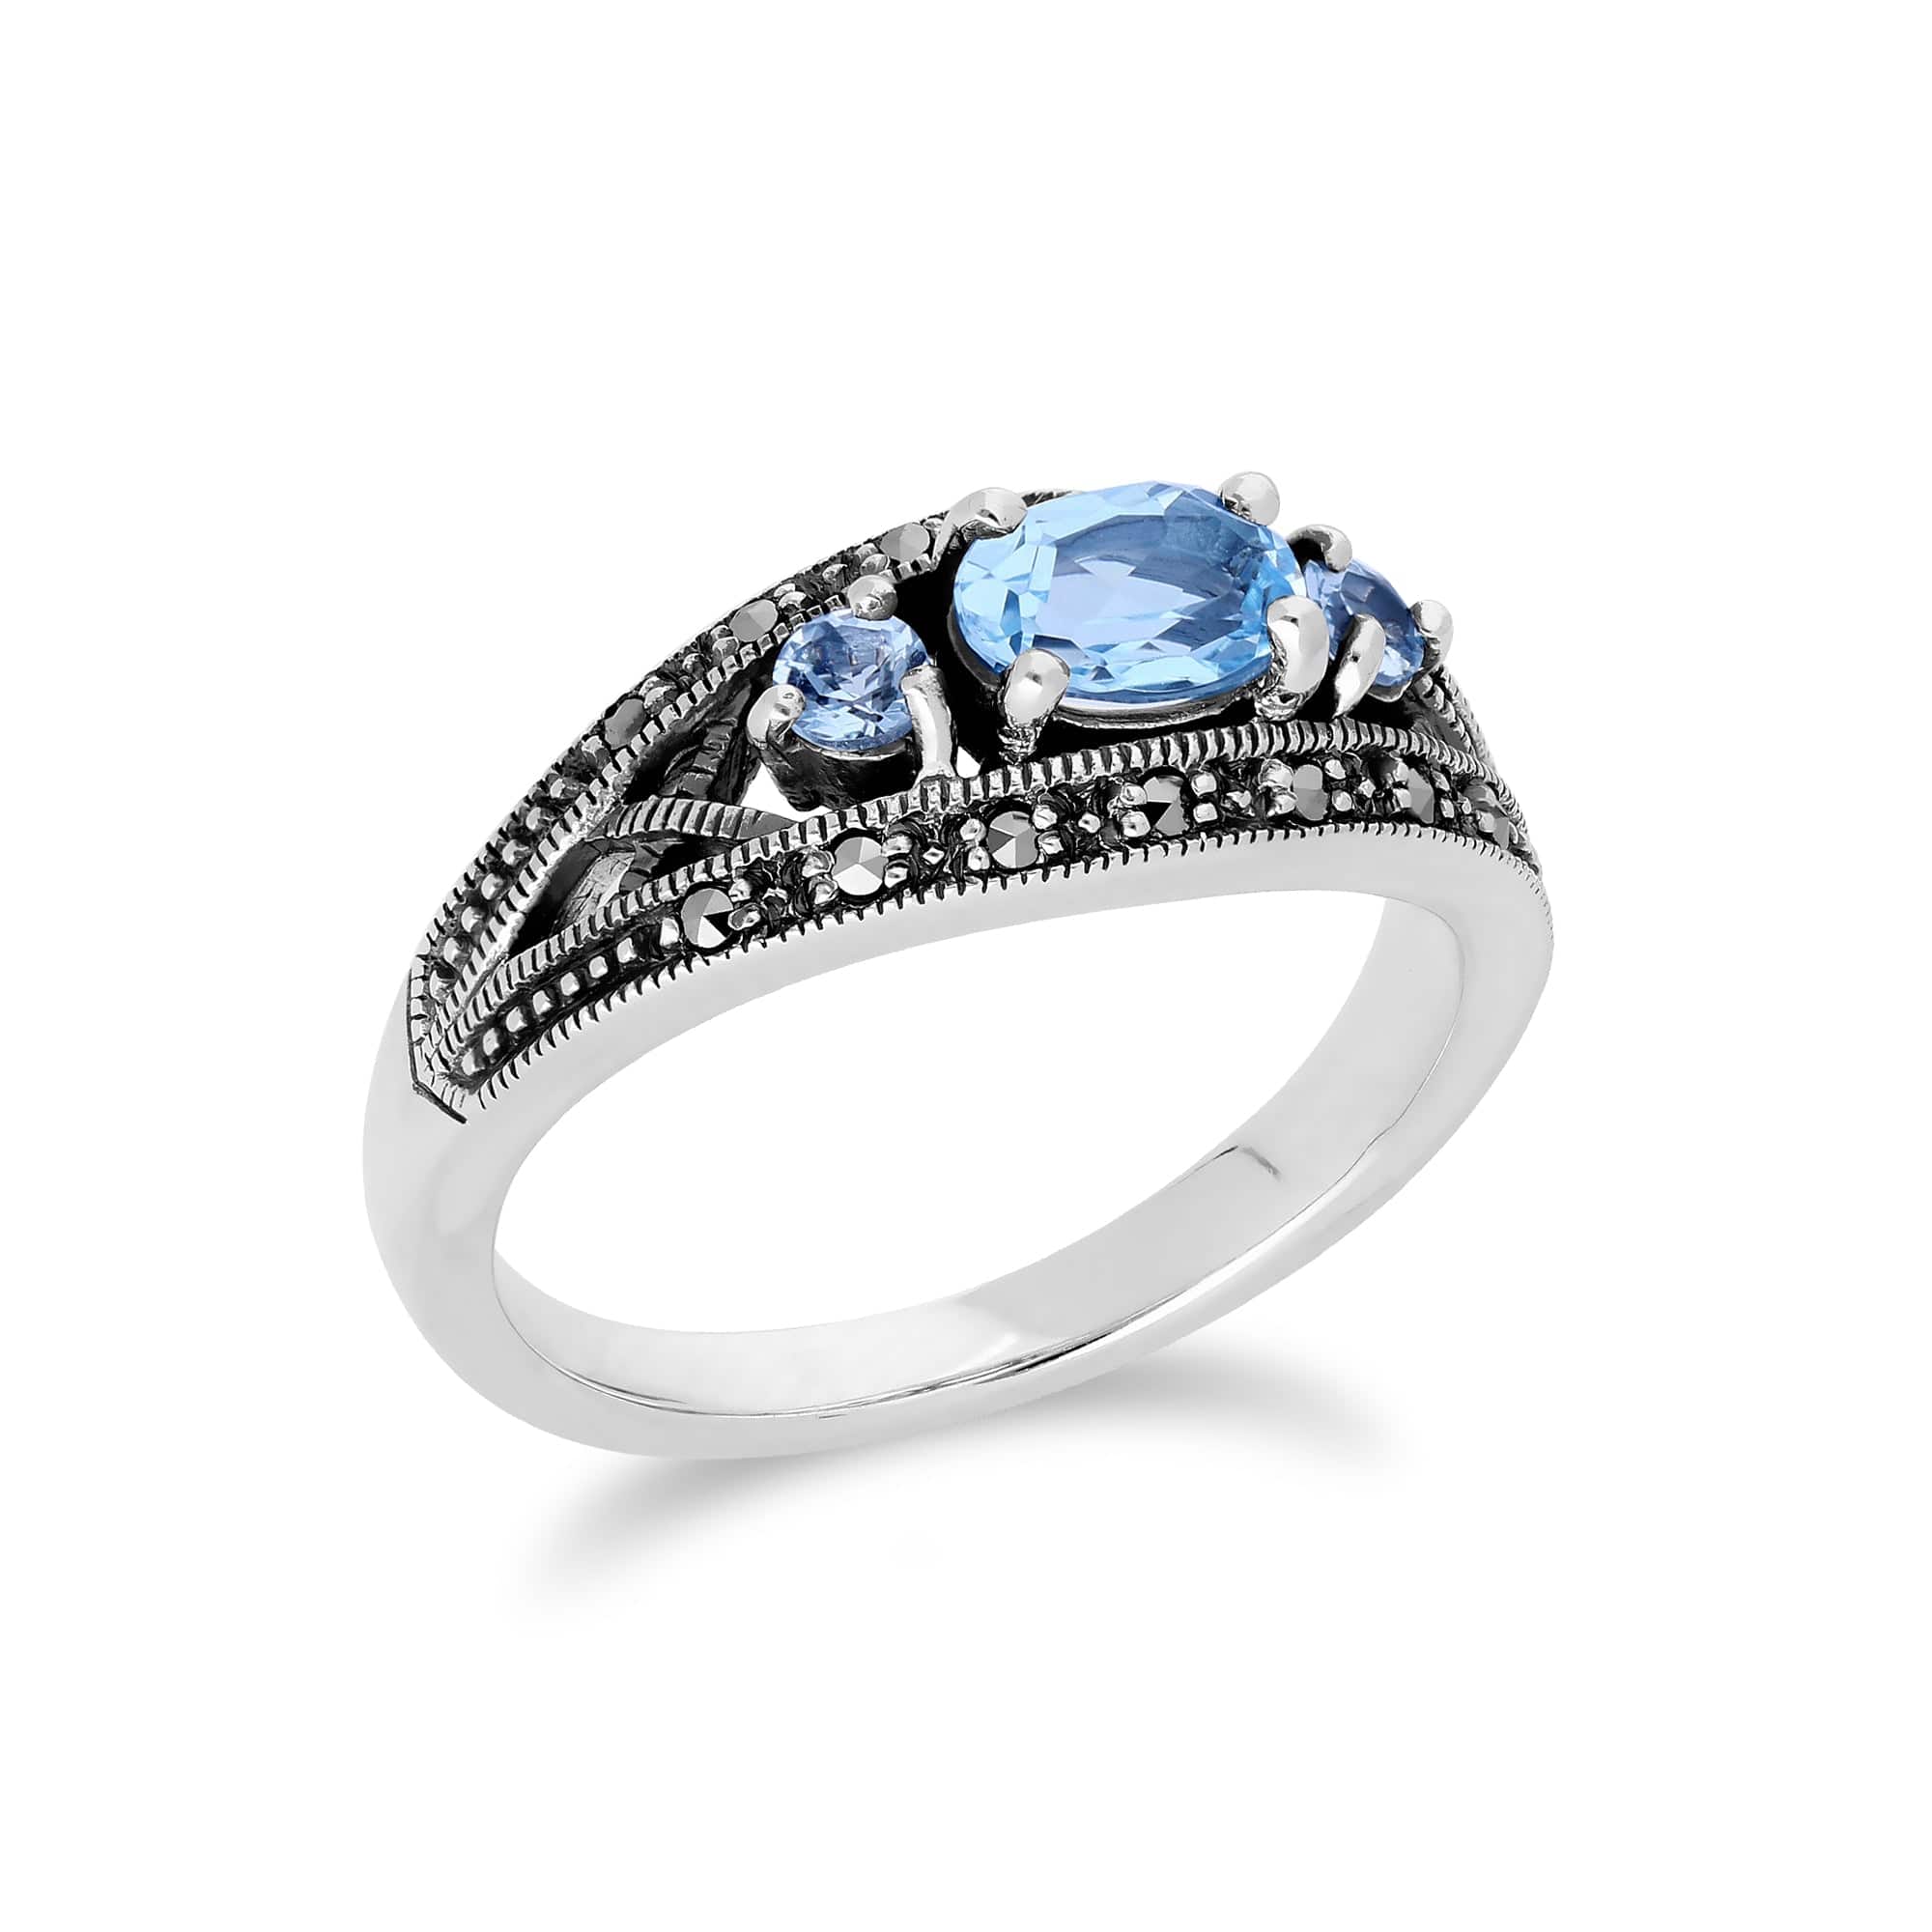 214R424003925 Art Deco Style Oval Blue Topaz & Marcasite Three Stone Ring in 925 Sterling Silver 2